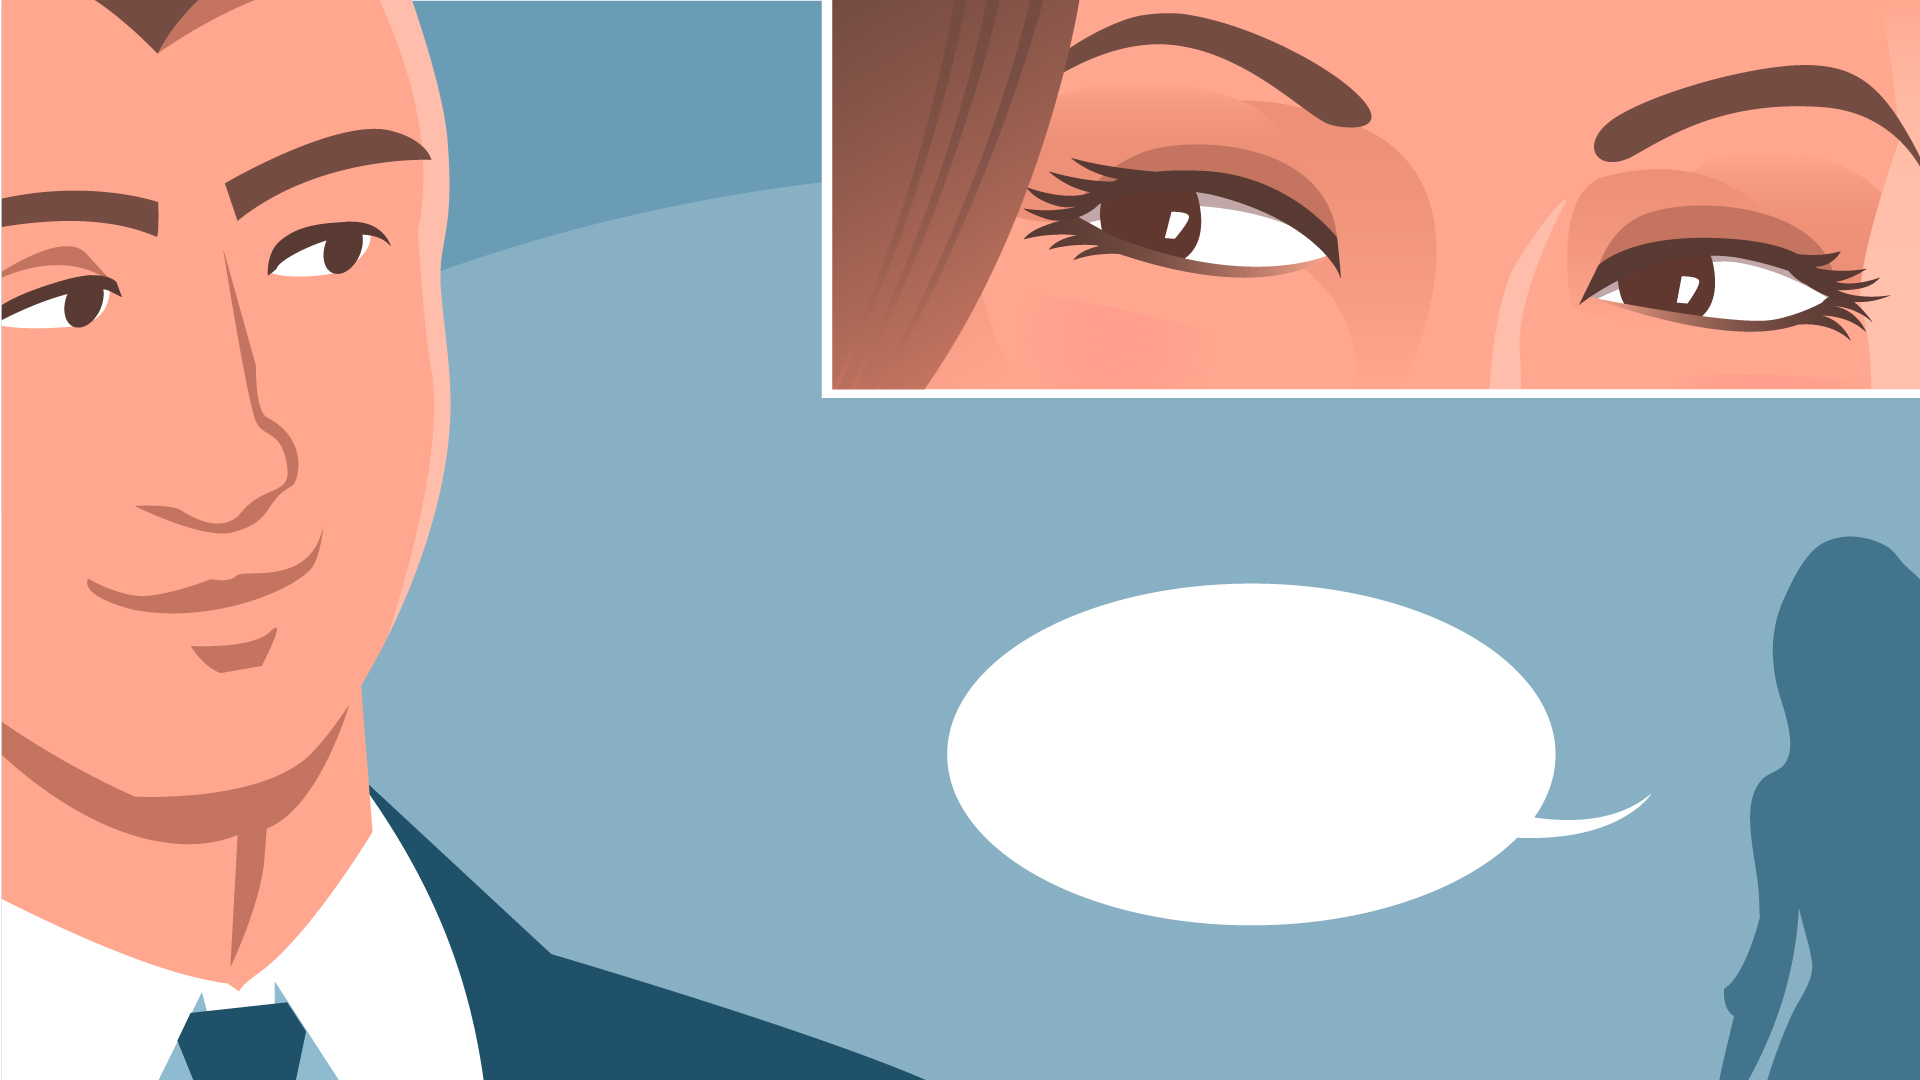 Eyes of a woman looking at a man, who is also looking at her. Empty speech bubble in the image coming from the woman.